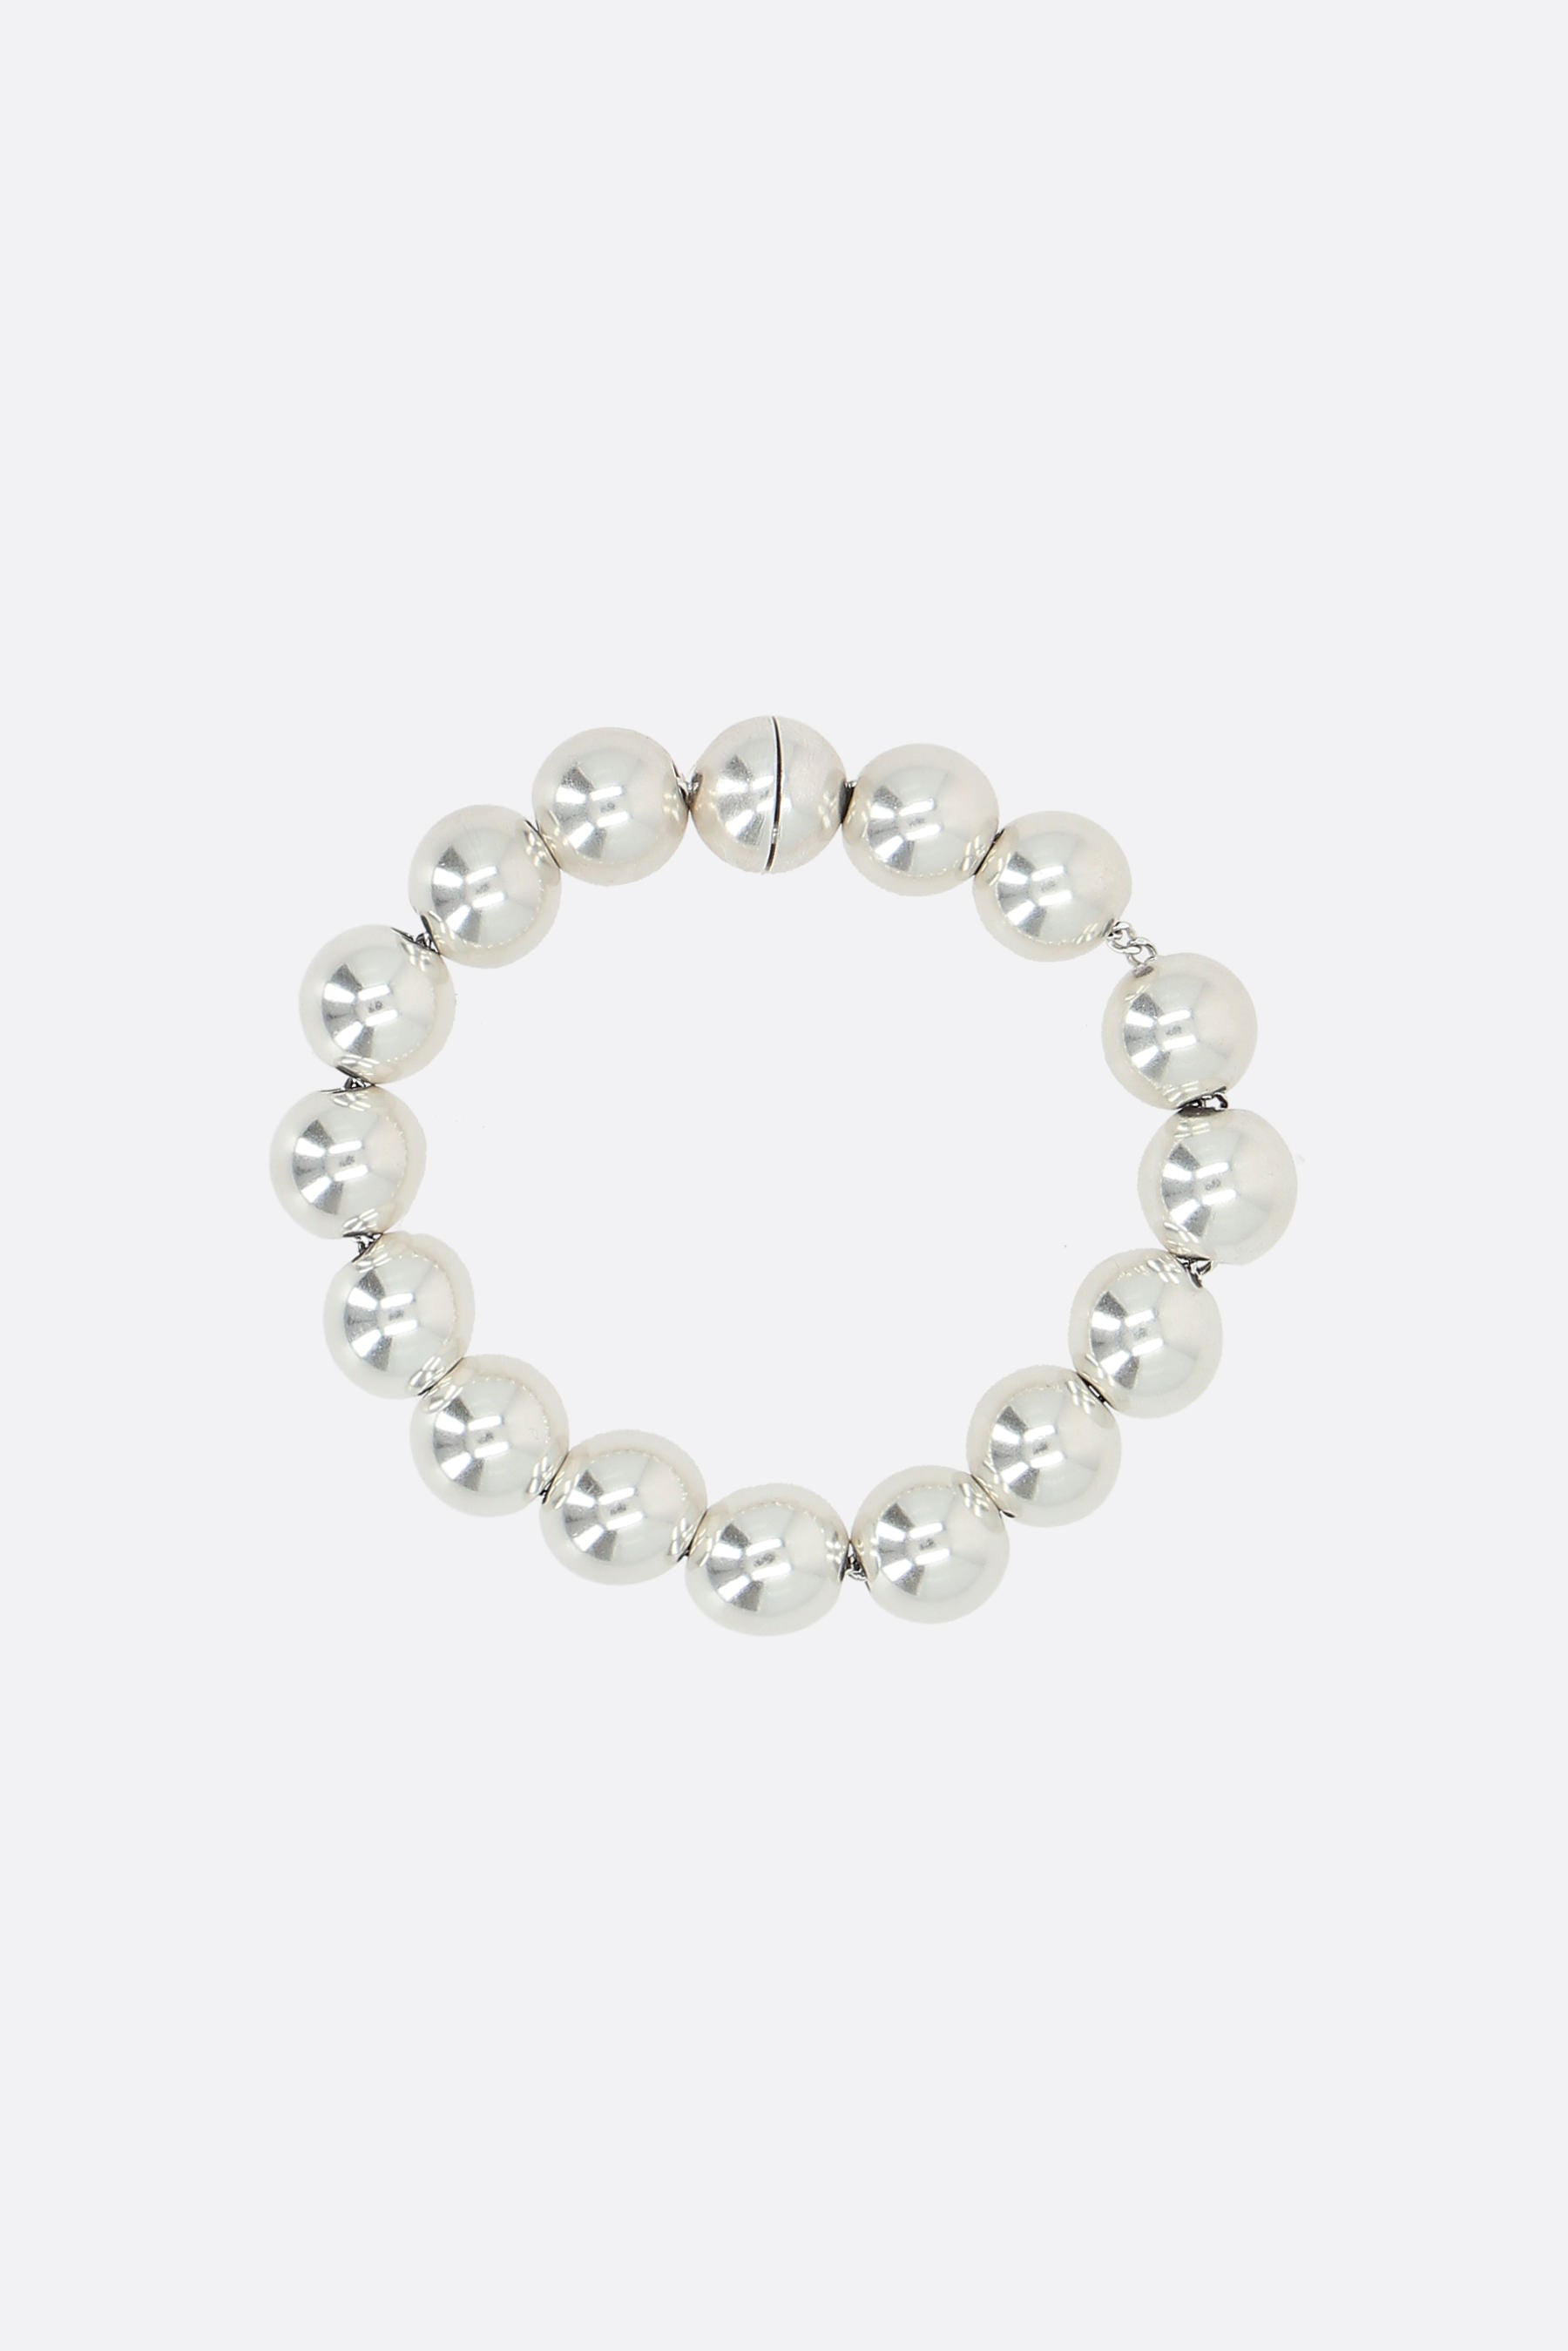 925 sterling silver bracelet with spheres